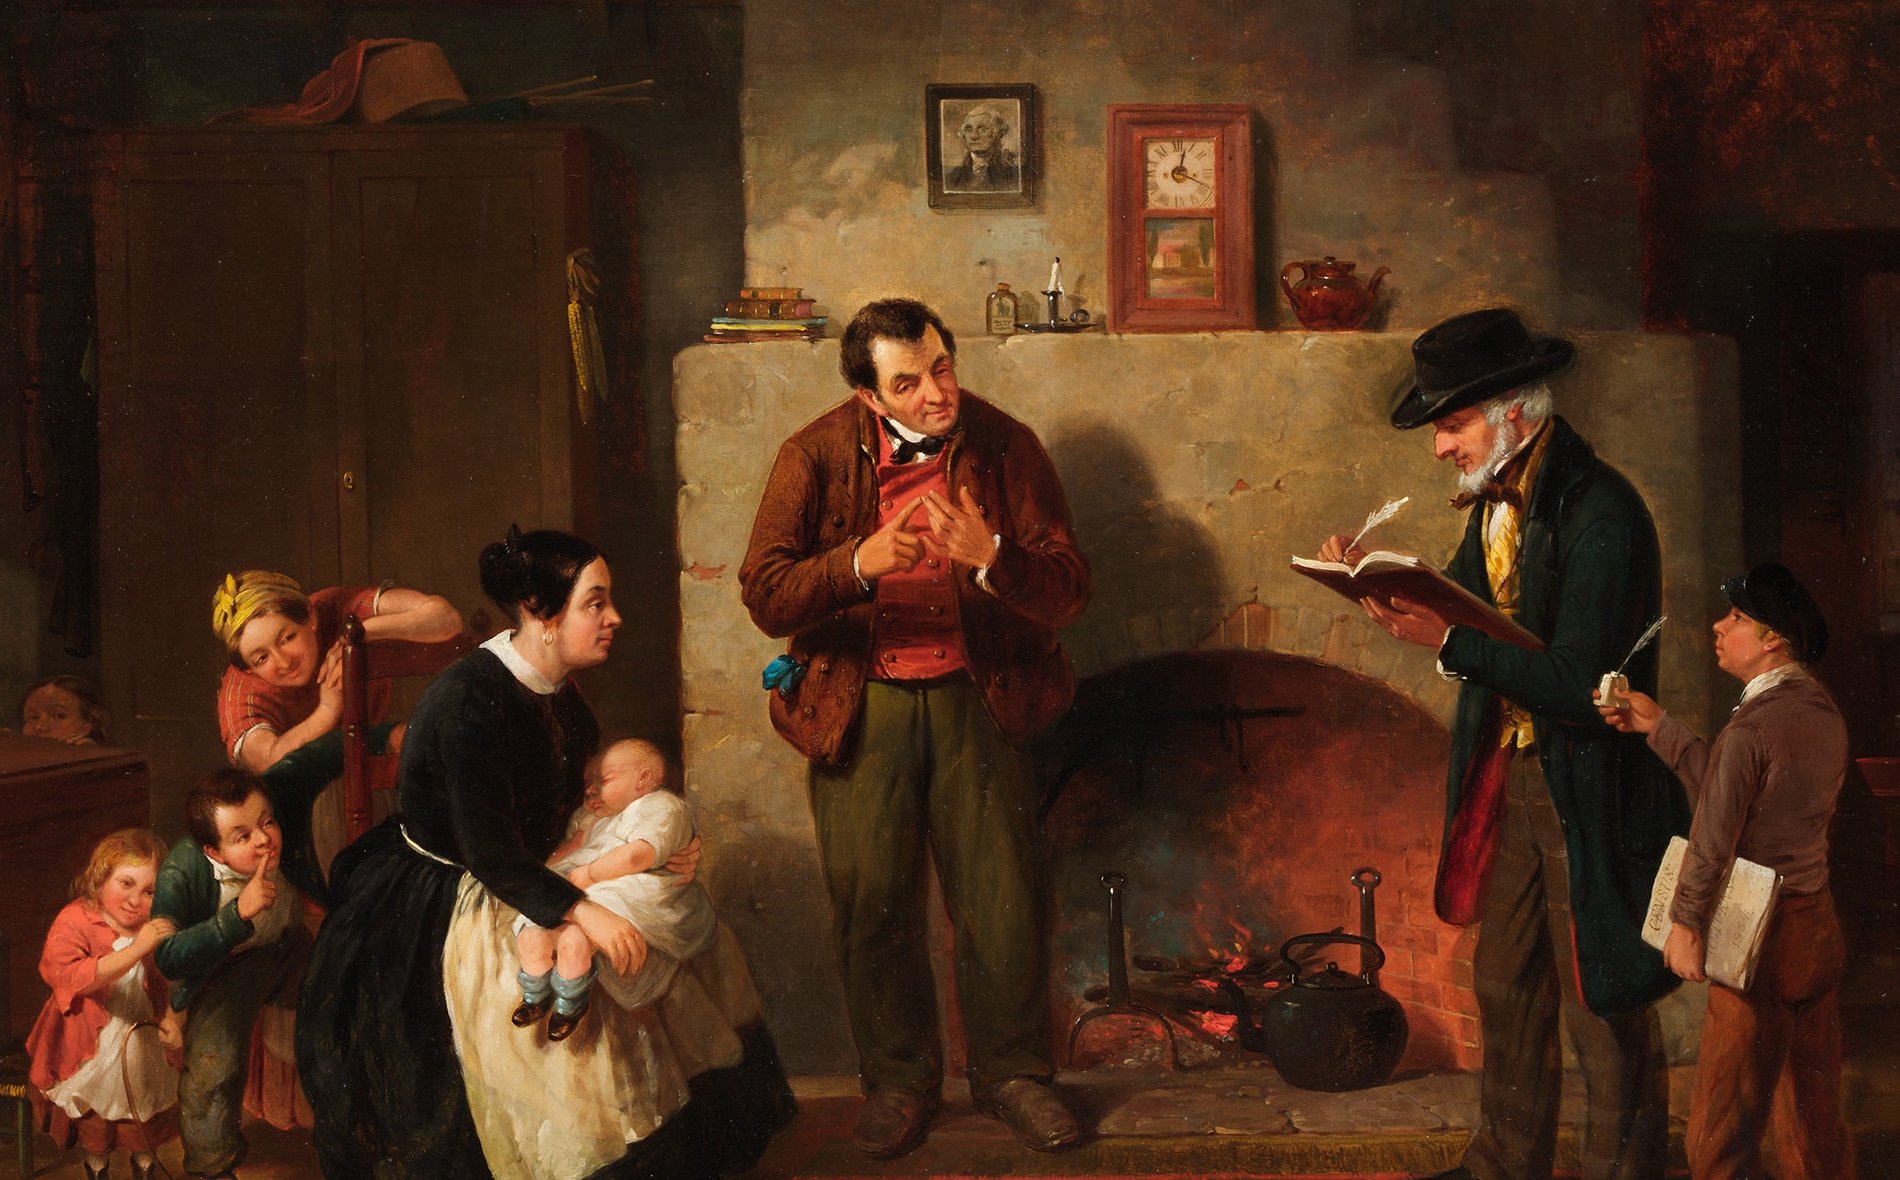 1854 painting of a census-taker in a family home